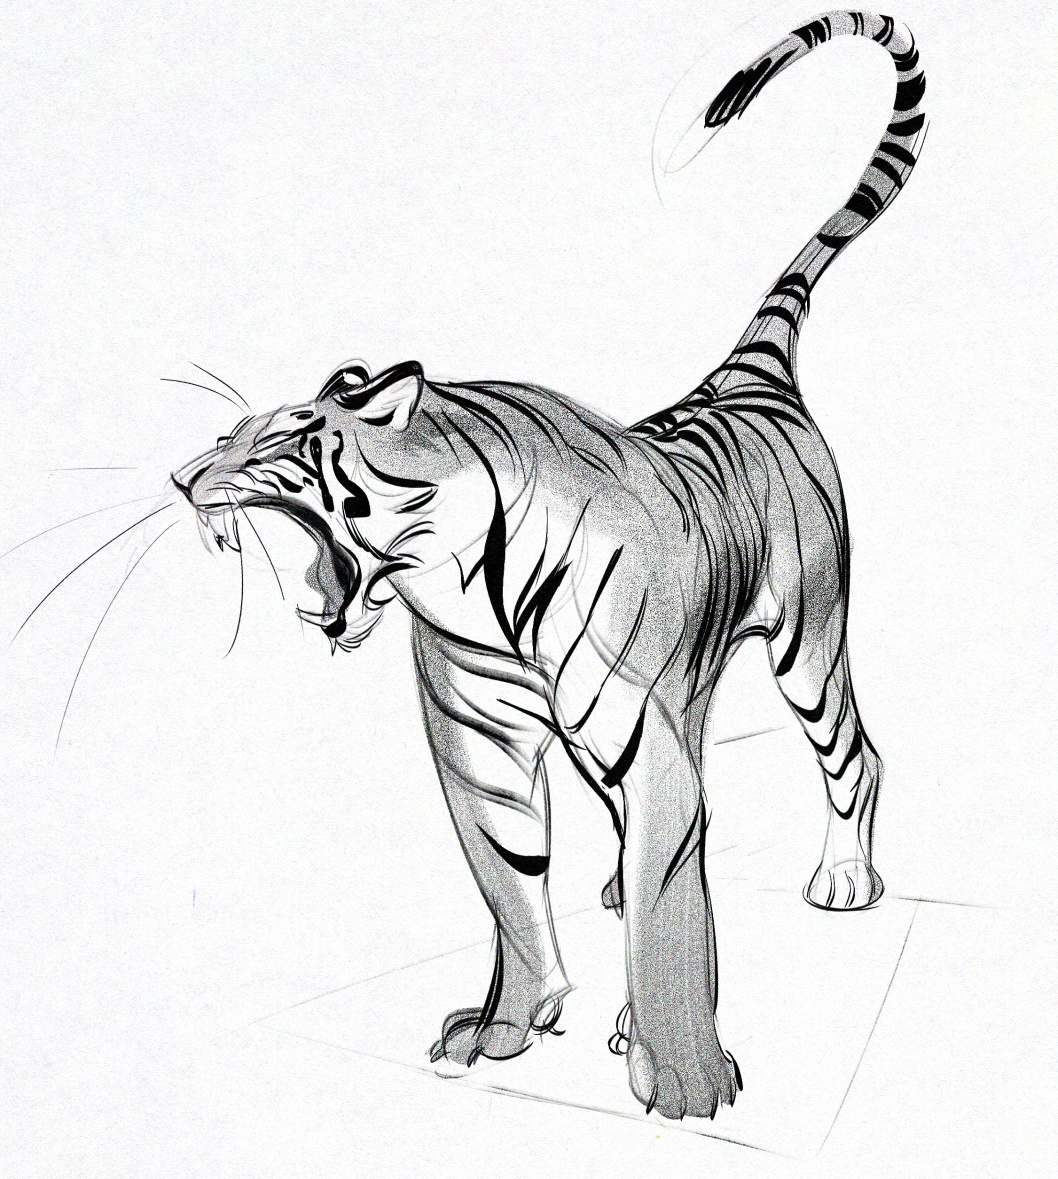 quick tiger study, powering through a deadline at the moment so relaxing with simple sketches 